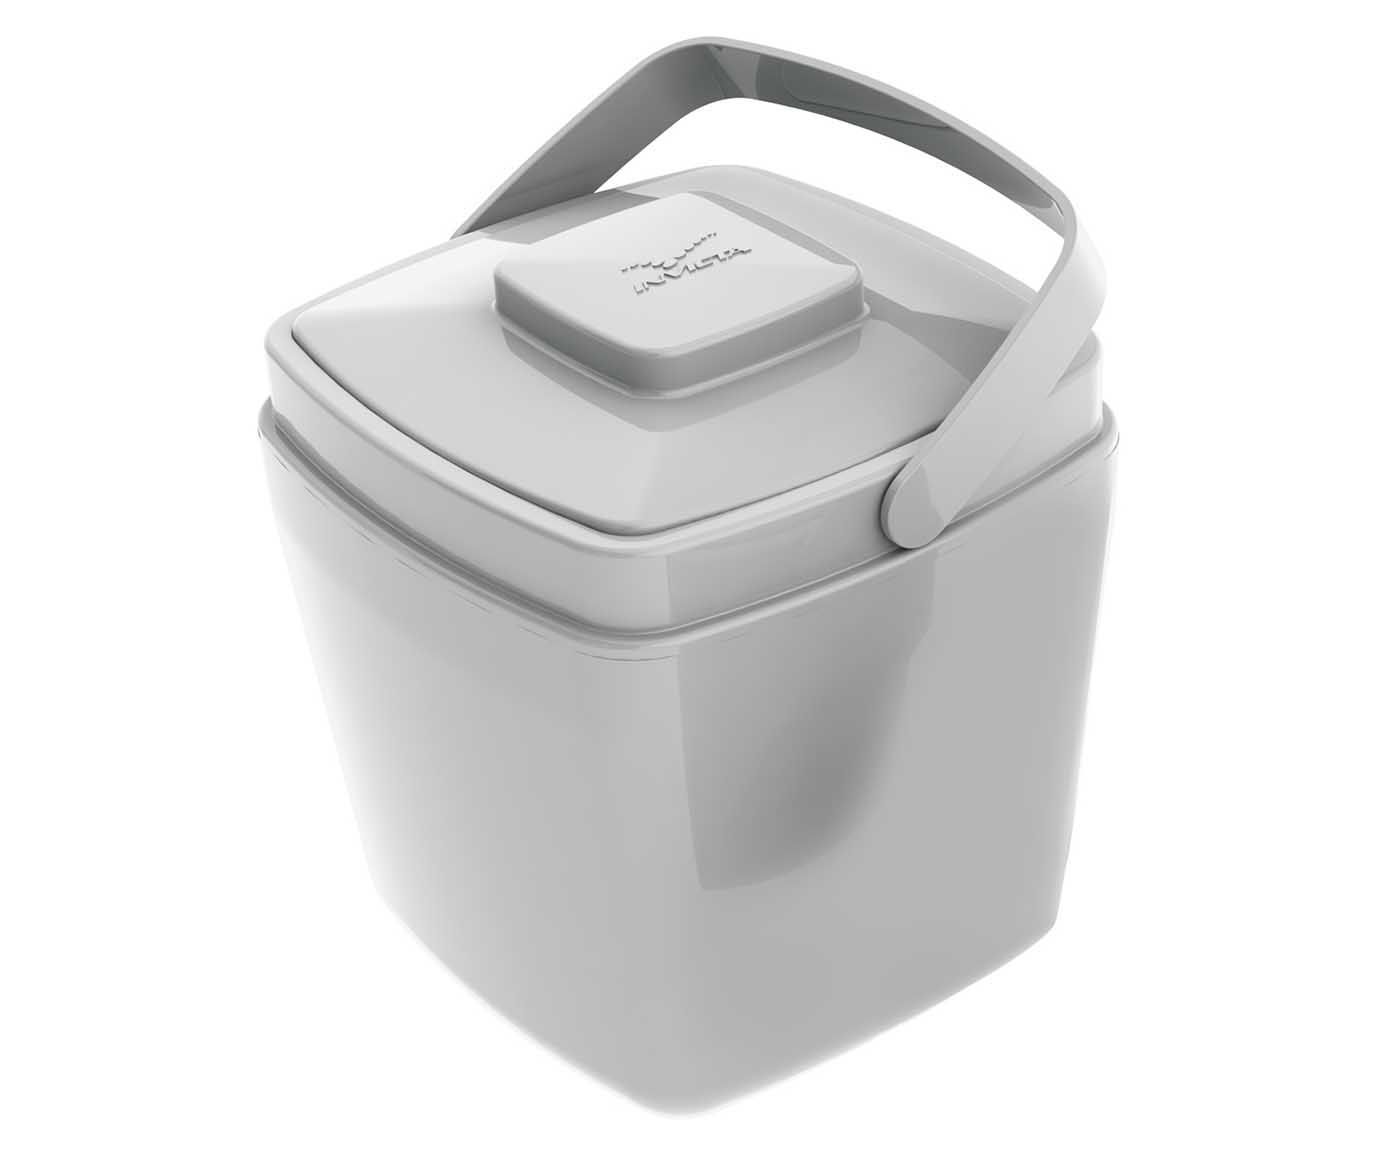 Cooler essential hollow - 2,5l | Westwing.com.br